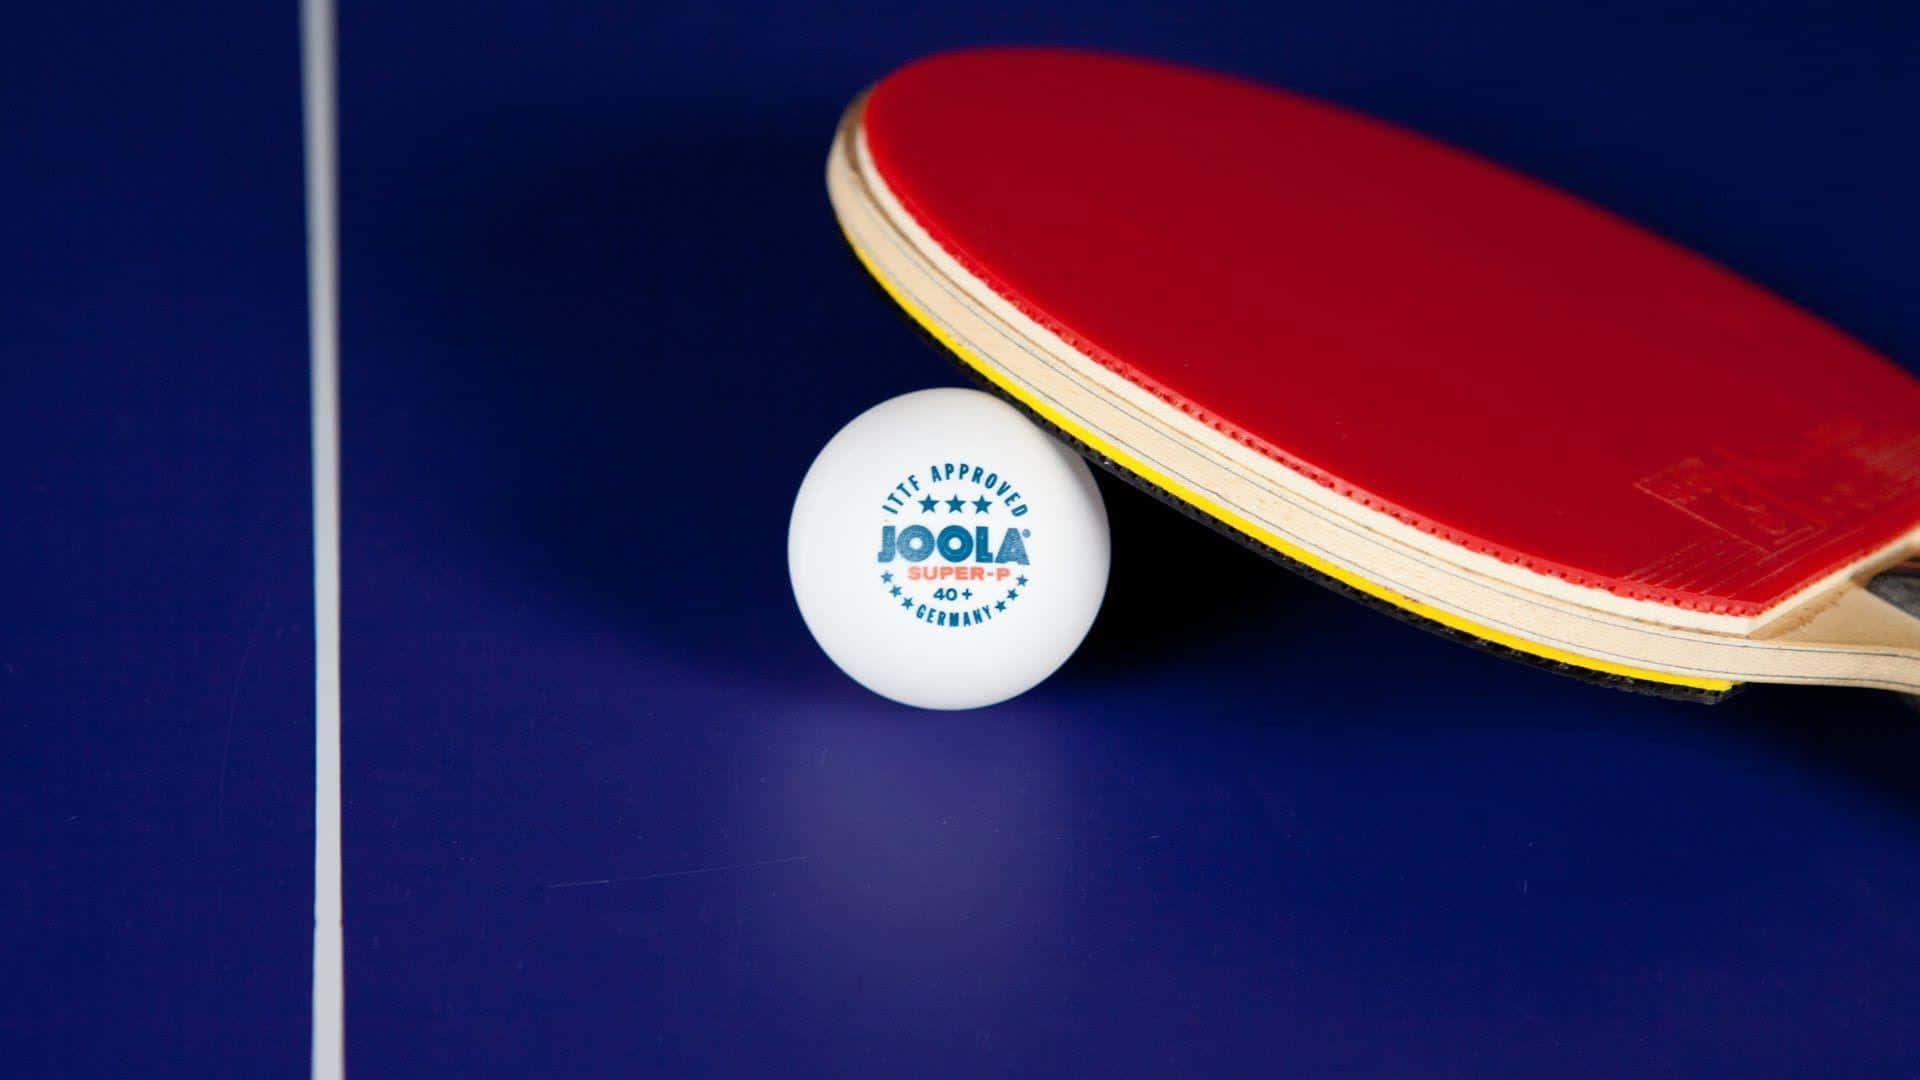 A Ping Pong Paddle And An Egg On A Table